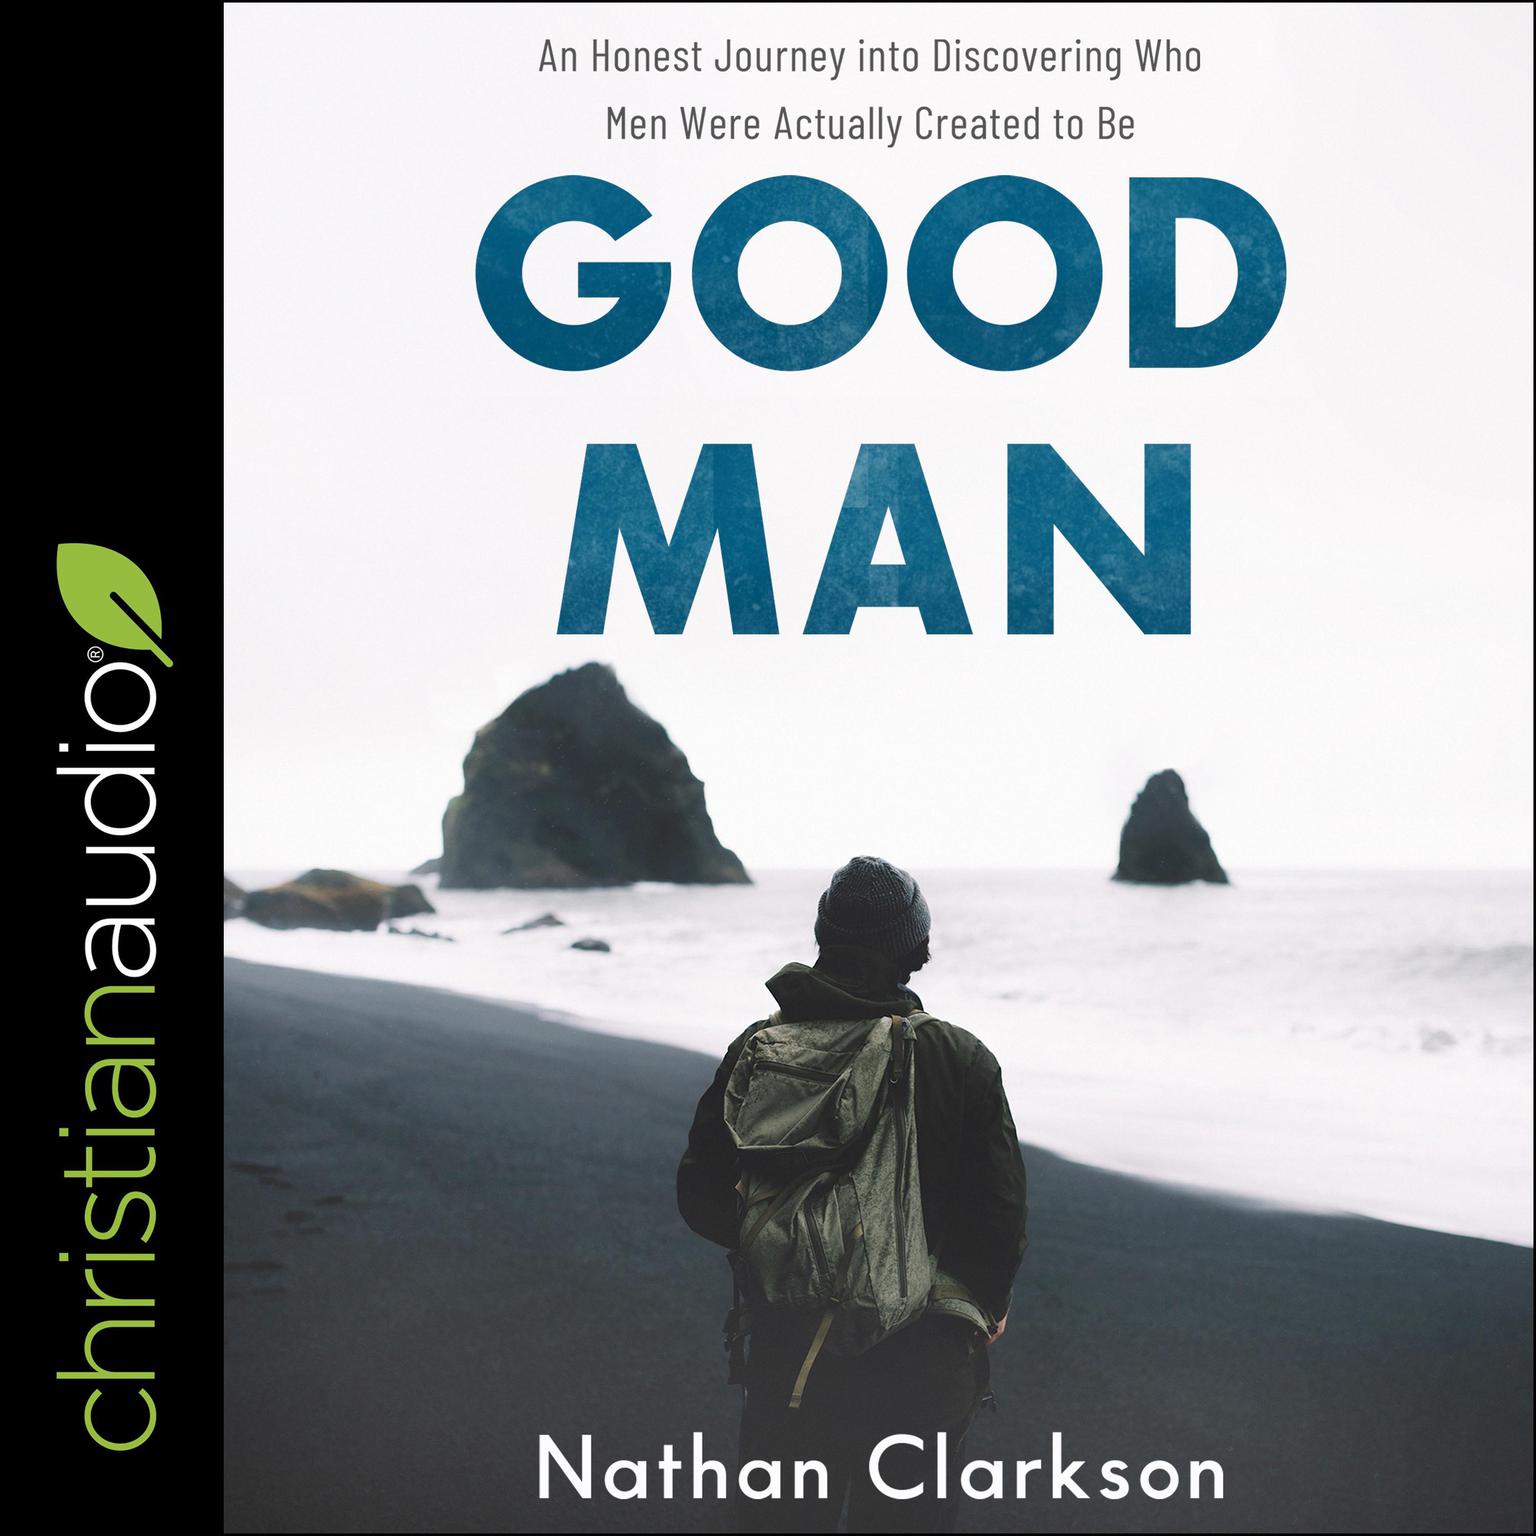 Good Man: An Honest Journey into Discovering Who Men Were Actually Created to Be Audiobook, by Nathan Clarkson